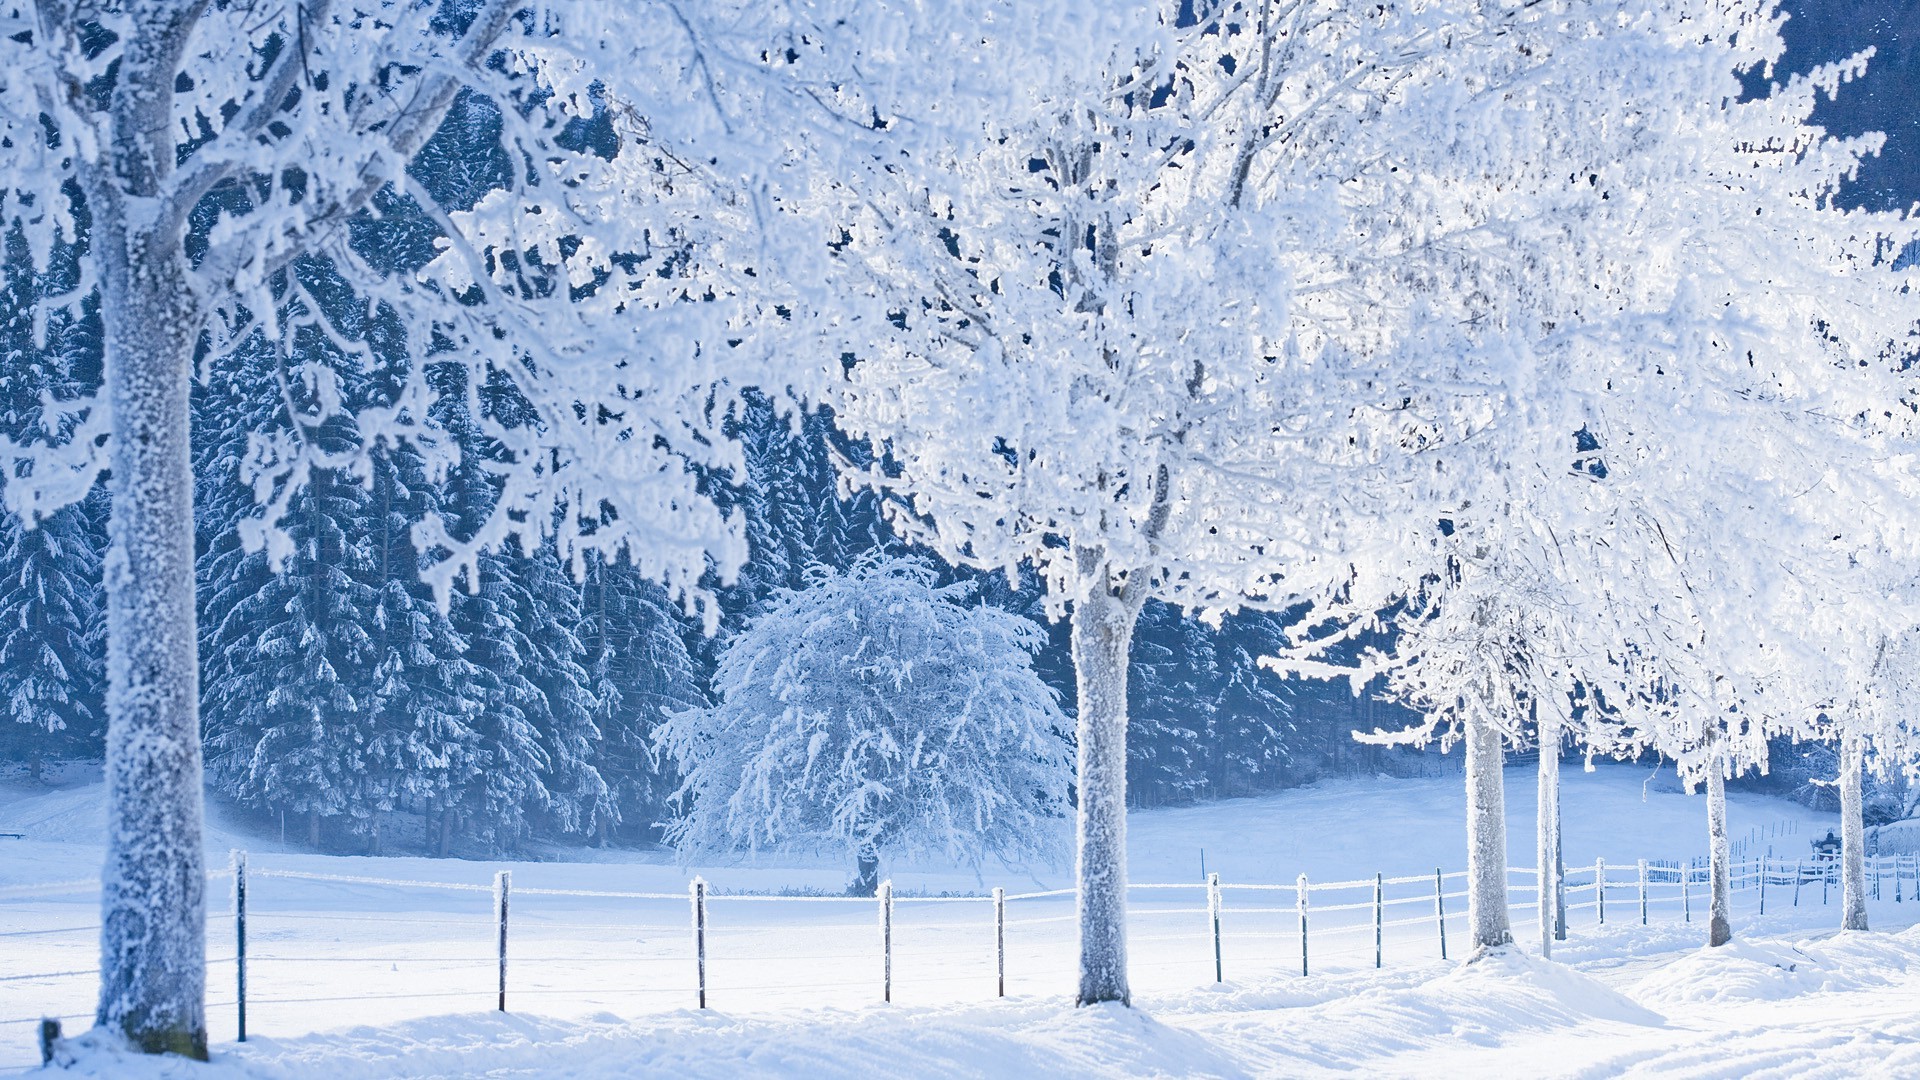 Real Snowy Backgrounds, wallpaper, Real Snowy Backgrounds hd wallpaper